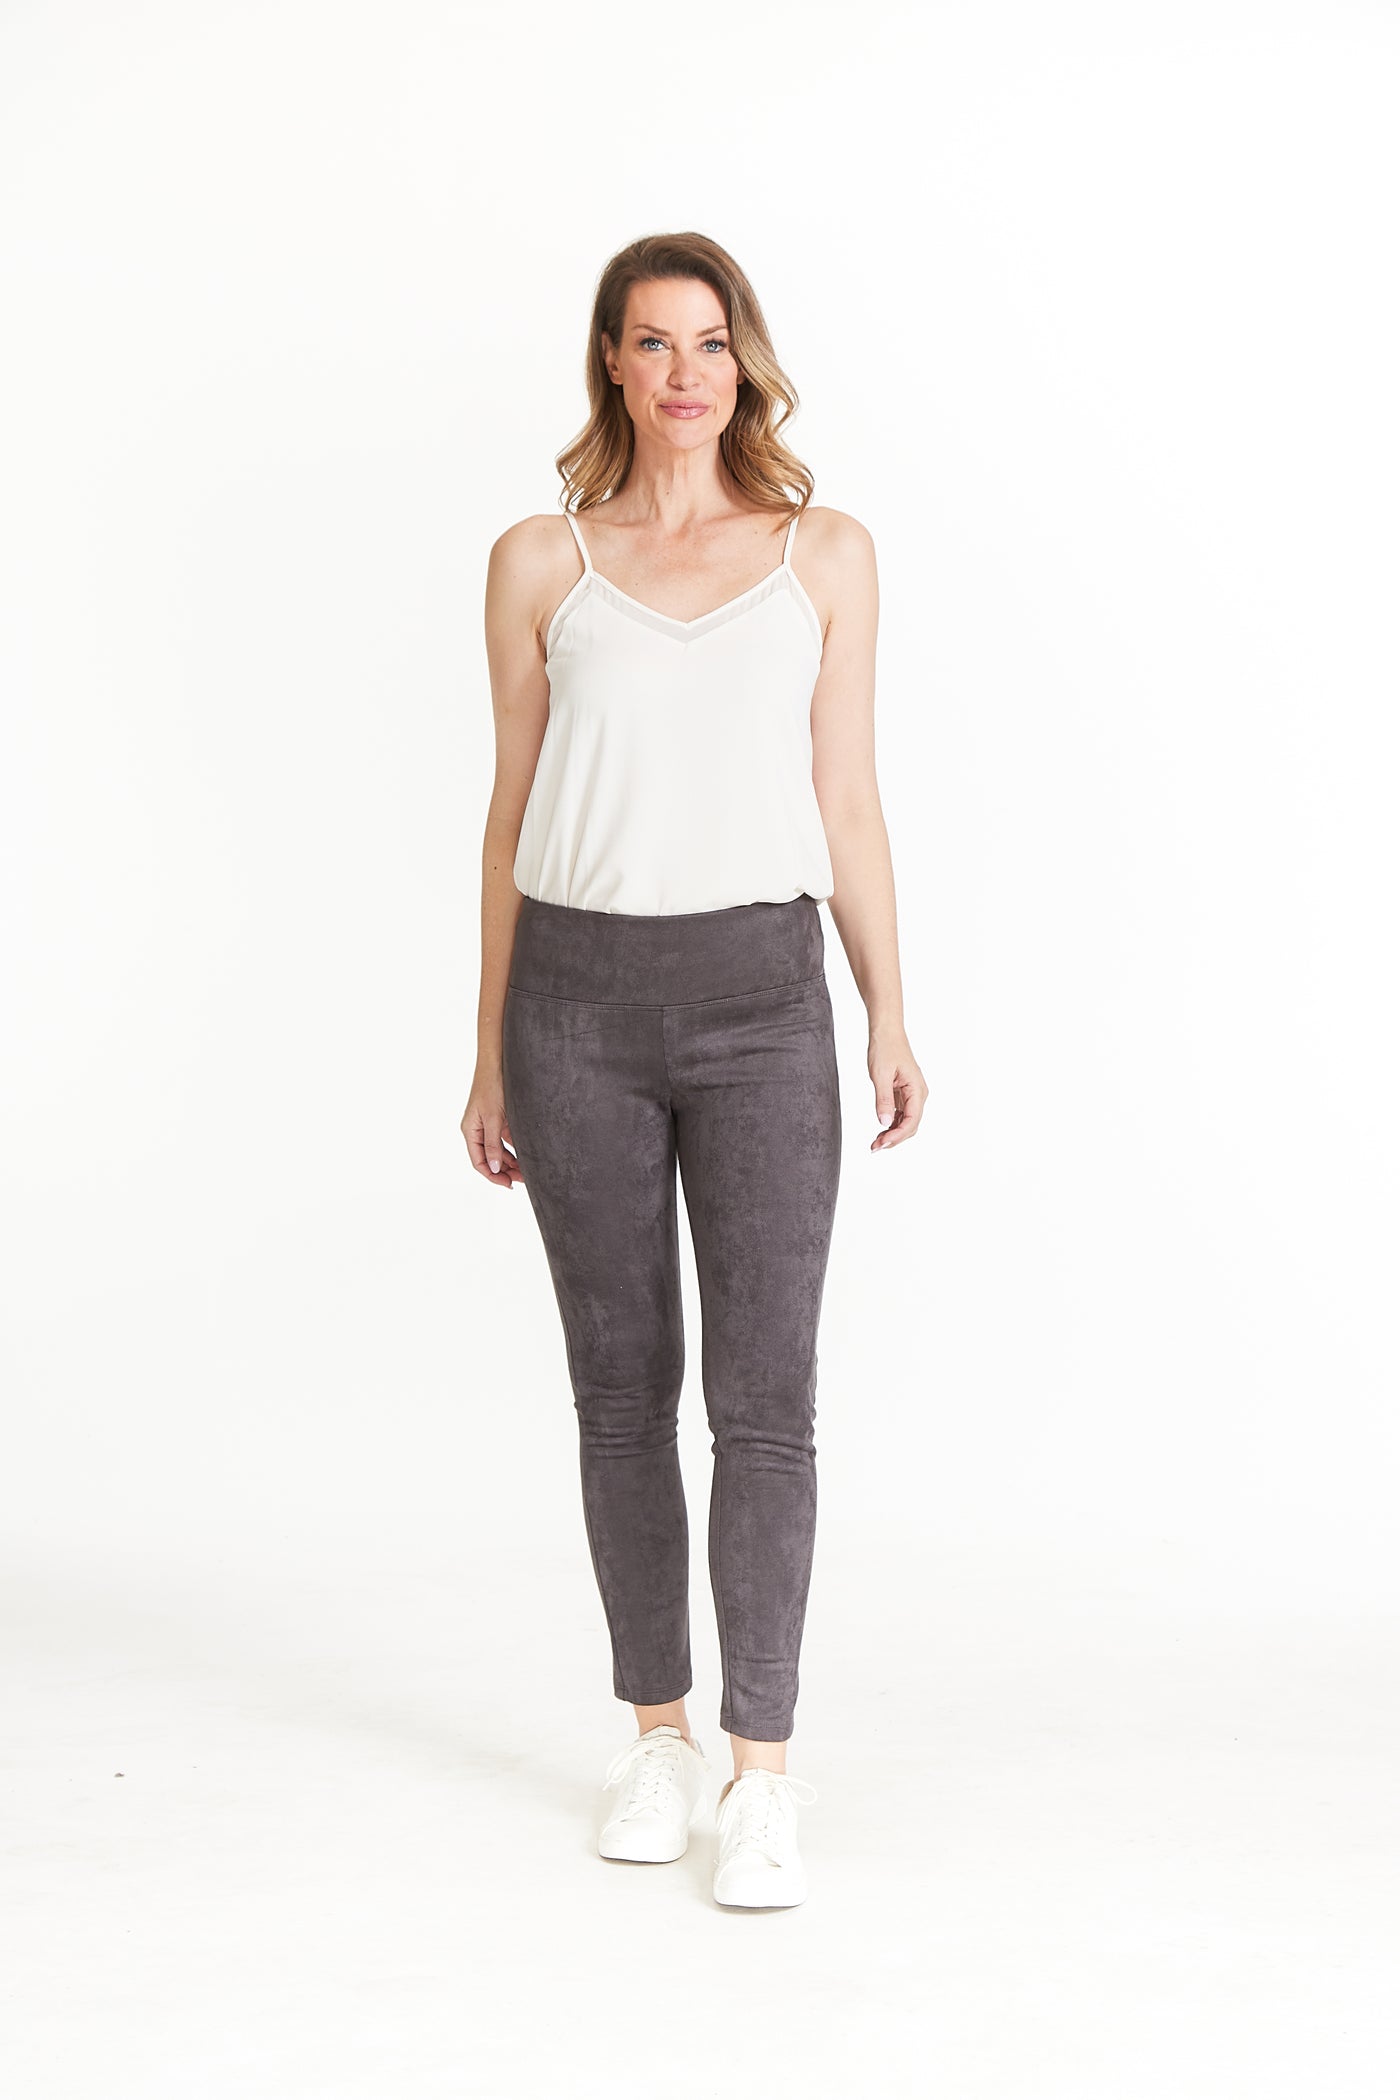 WIDE BAND PULL-ON ANKLE LEGGING - Dark Charcoal